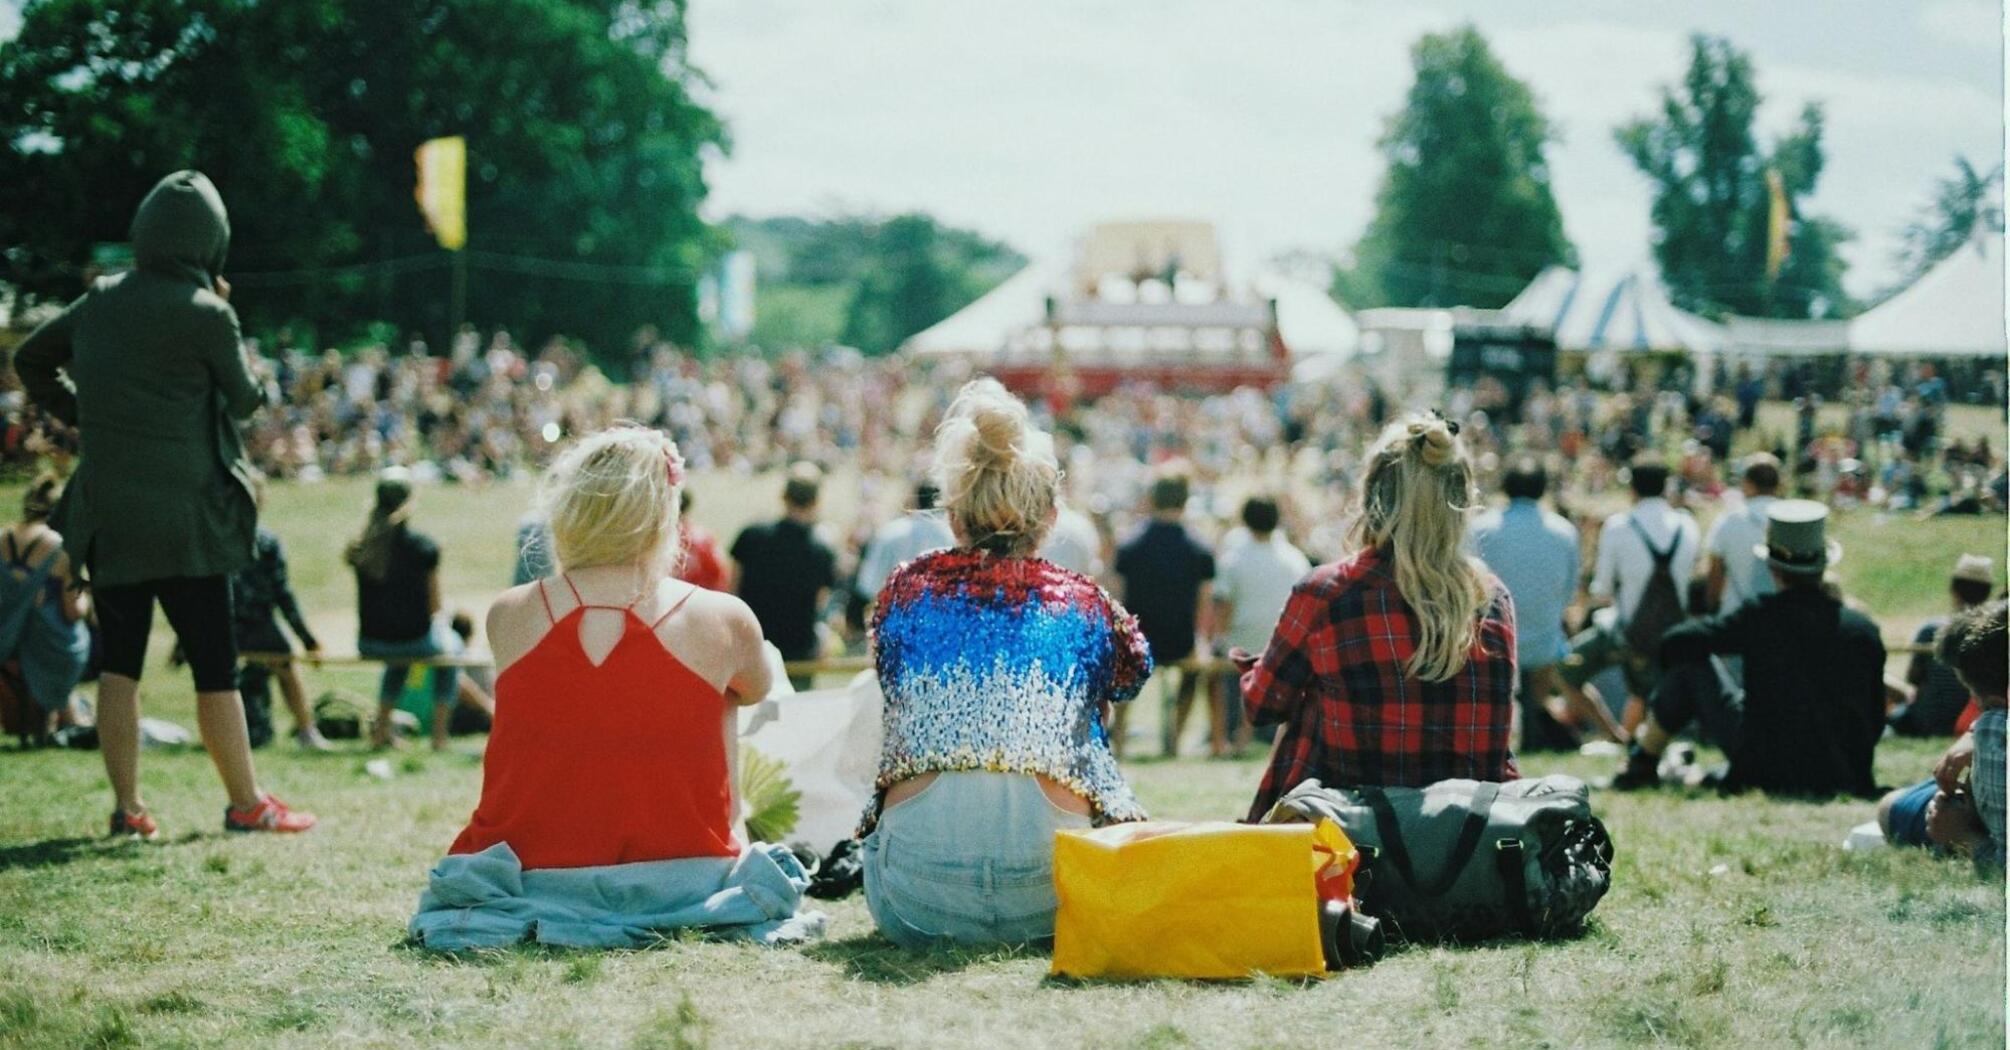 A group of people at the festival